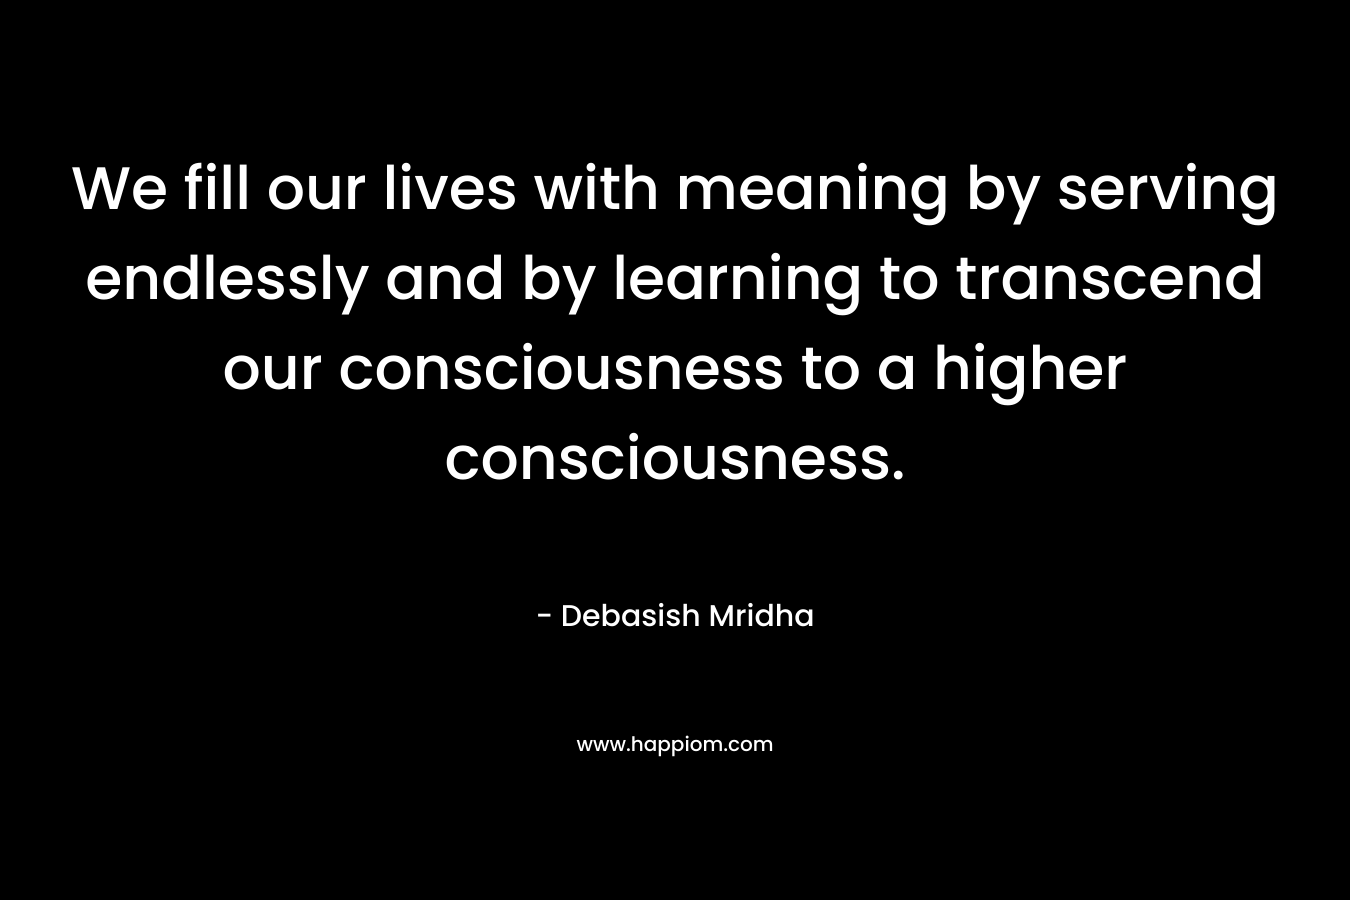 We fill our lives with meaning by serving endlessly and by learning to transcend our consciousness to a higher consciousness.